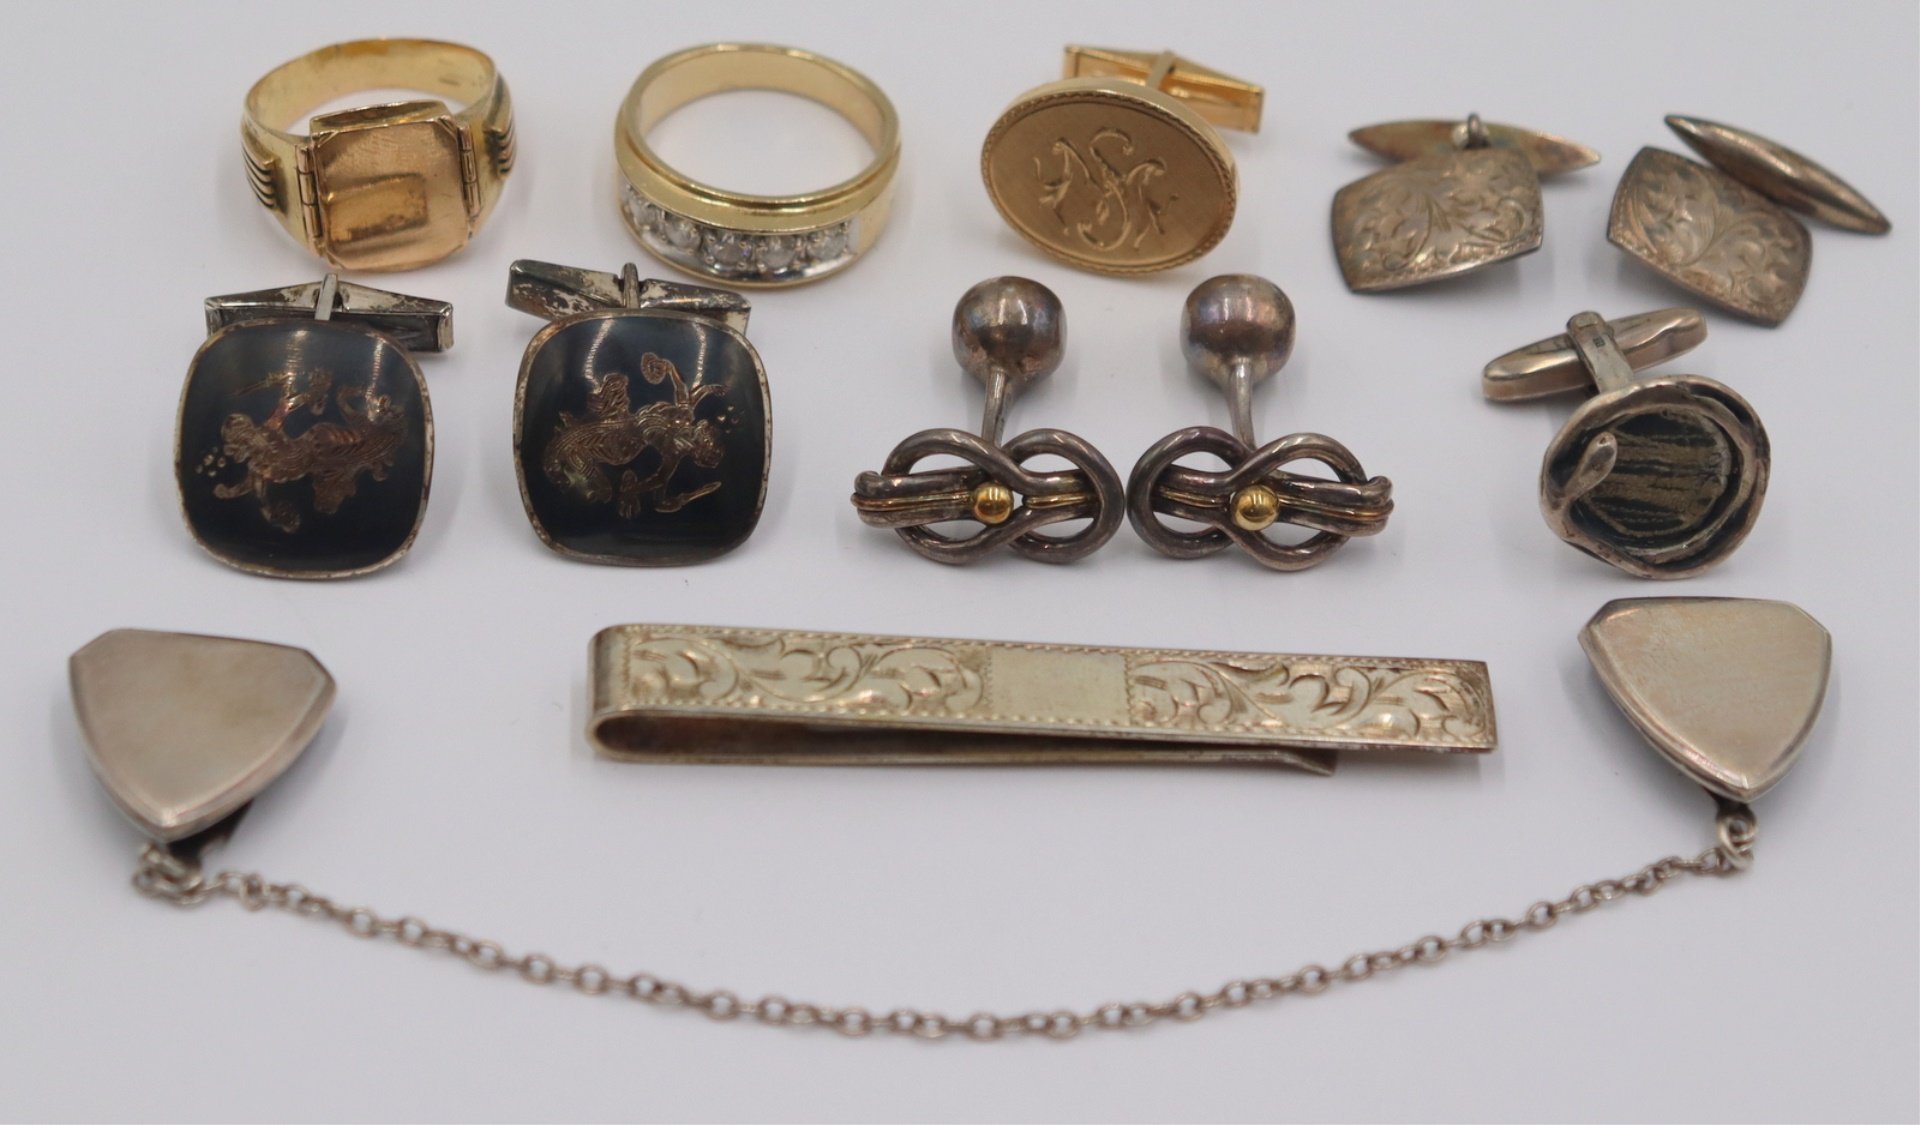 JEWELRY. MEN'S GROUPING OF GOLD